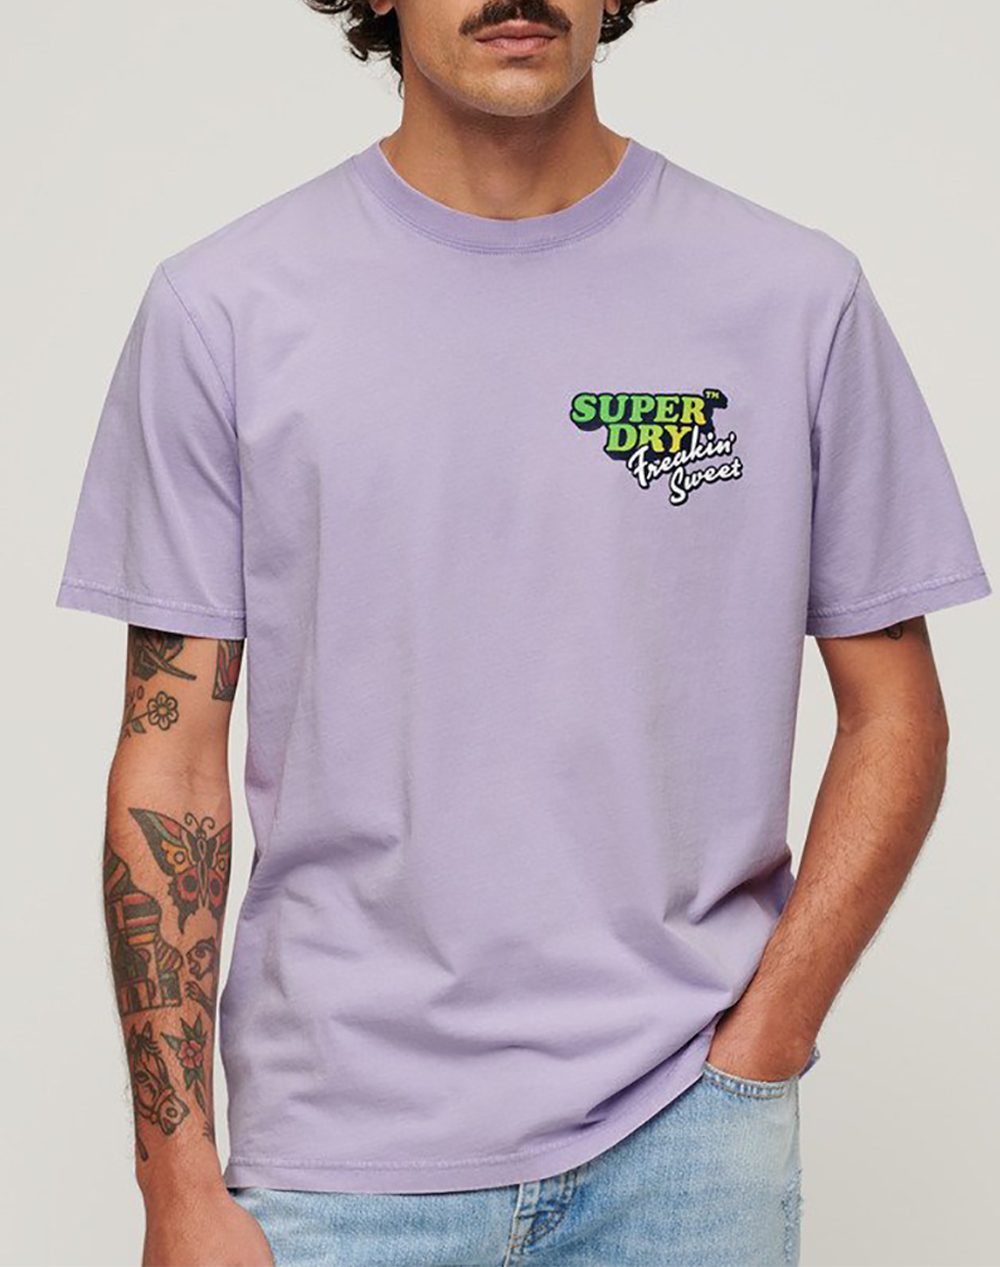 SUPERDRY D2 OVIN NEON TRAVEL CHEST LOOSE TEE ΜΠΛΟΥΖΑ ΑΝΔΡΙΚΟ M1011907A-1KX Purple 3820ASUPE3400323_XR28297